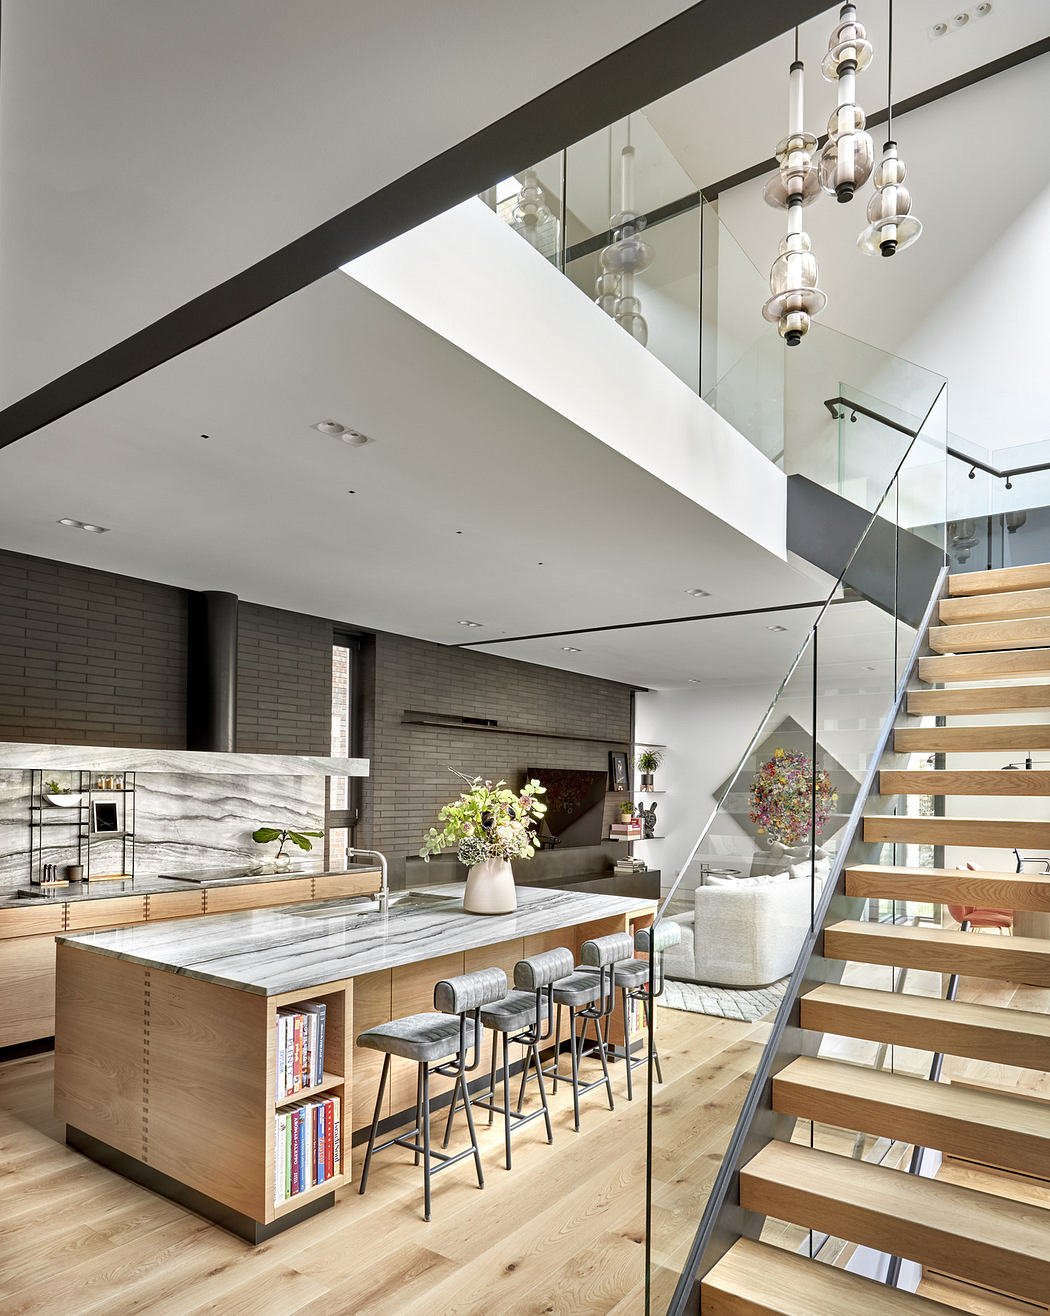 Modern home interior with wooden stairs, glass railing, and an open-plan kitchen.